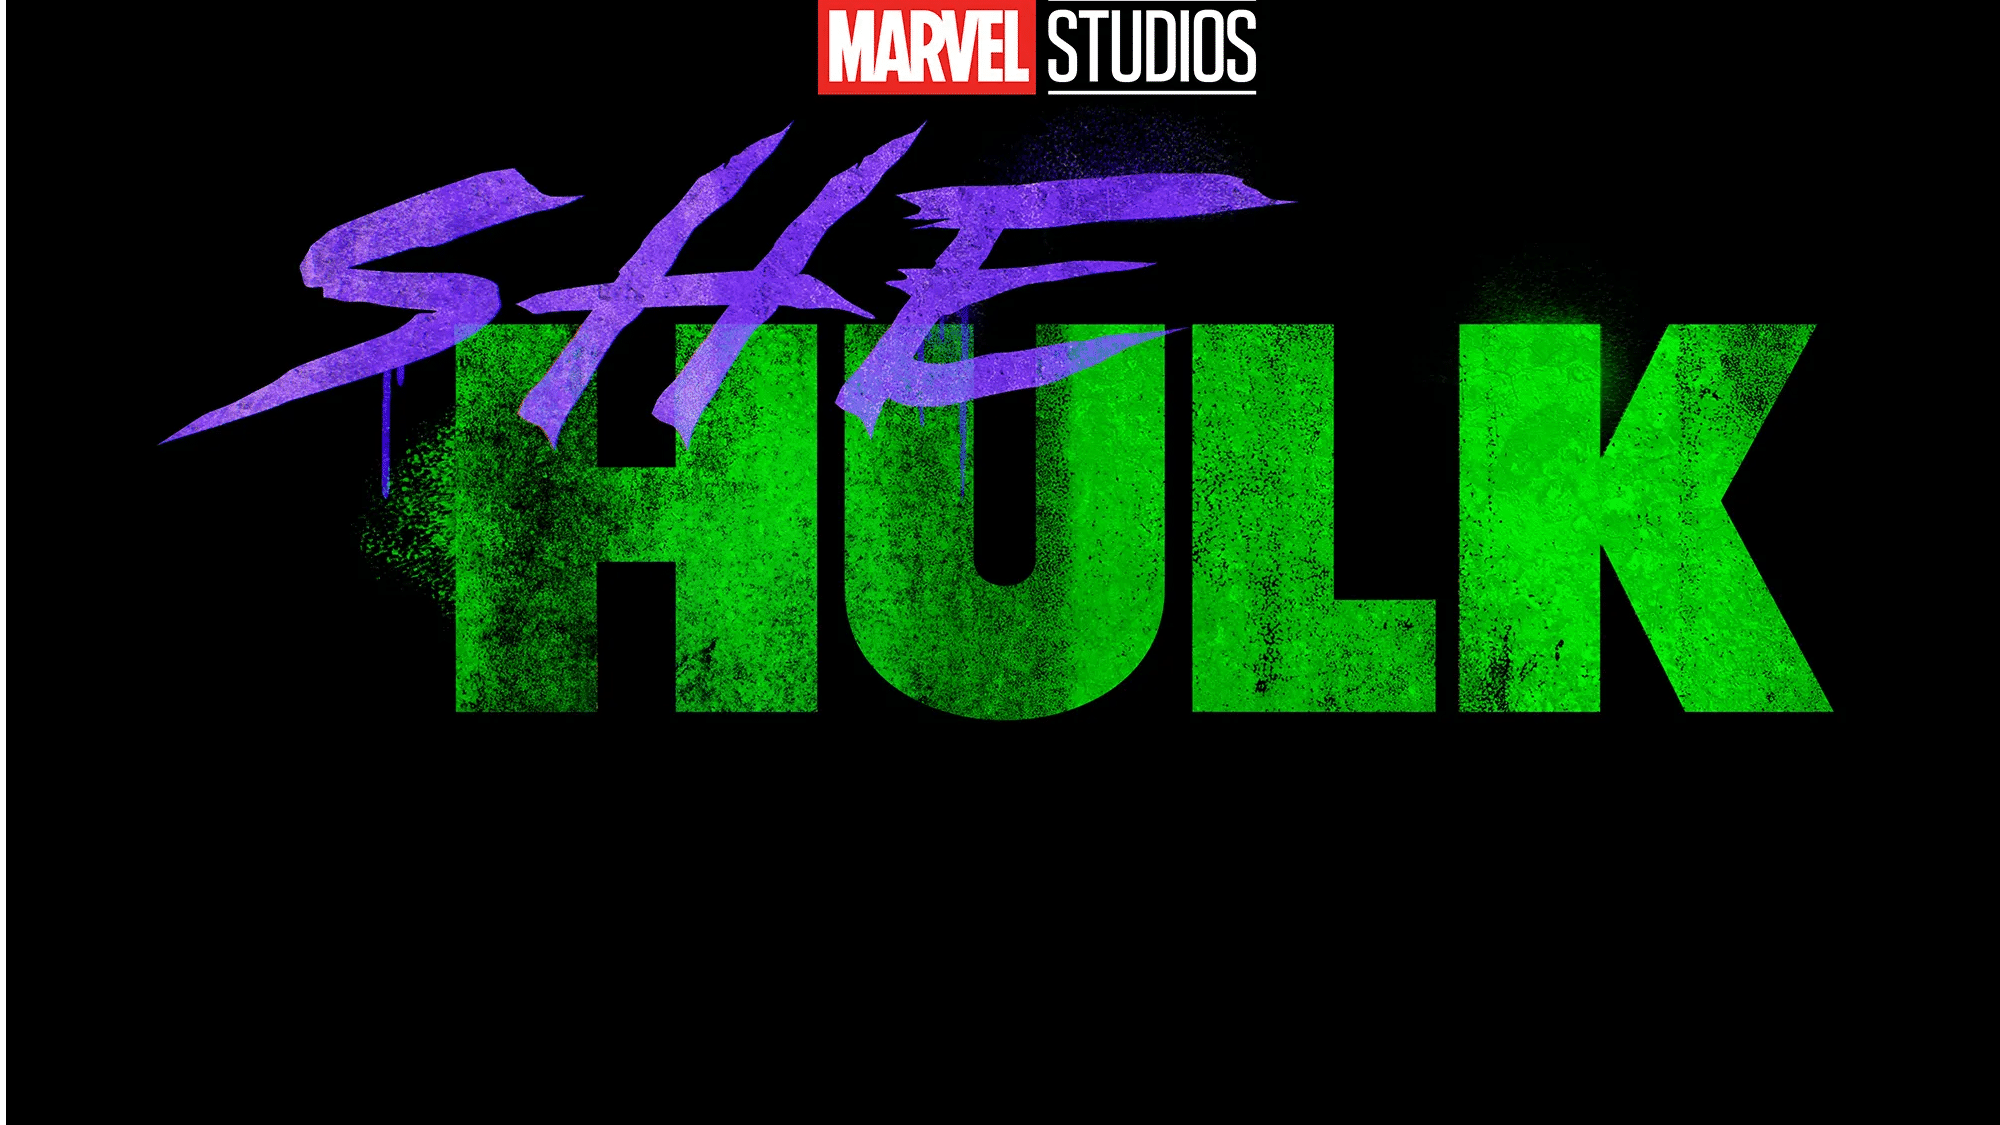 She-Hulk to release on Marvel TV in 2022, Tatiana Maslany to play title role